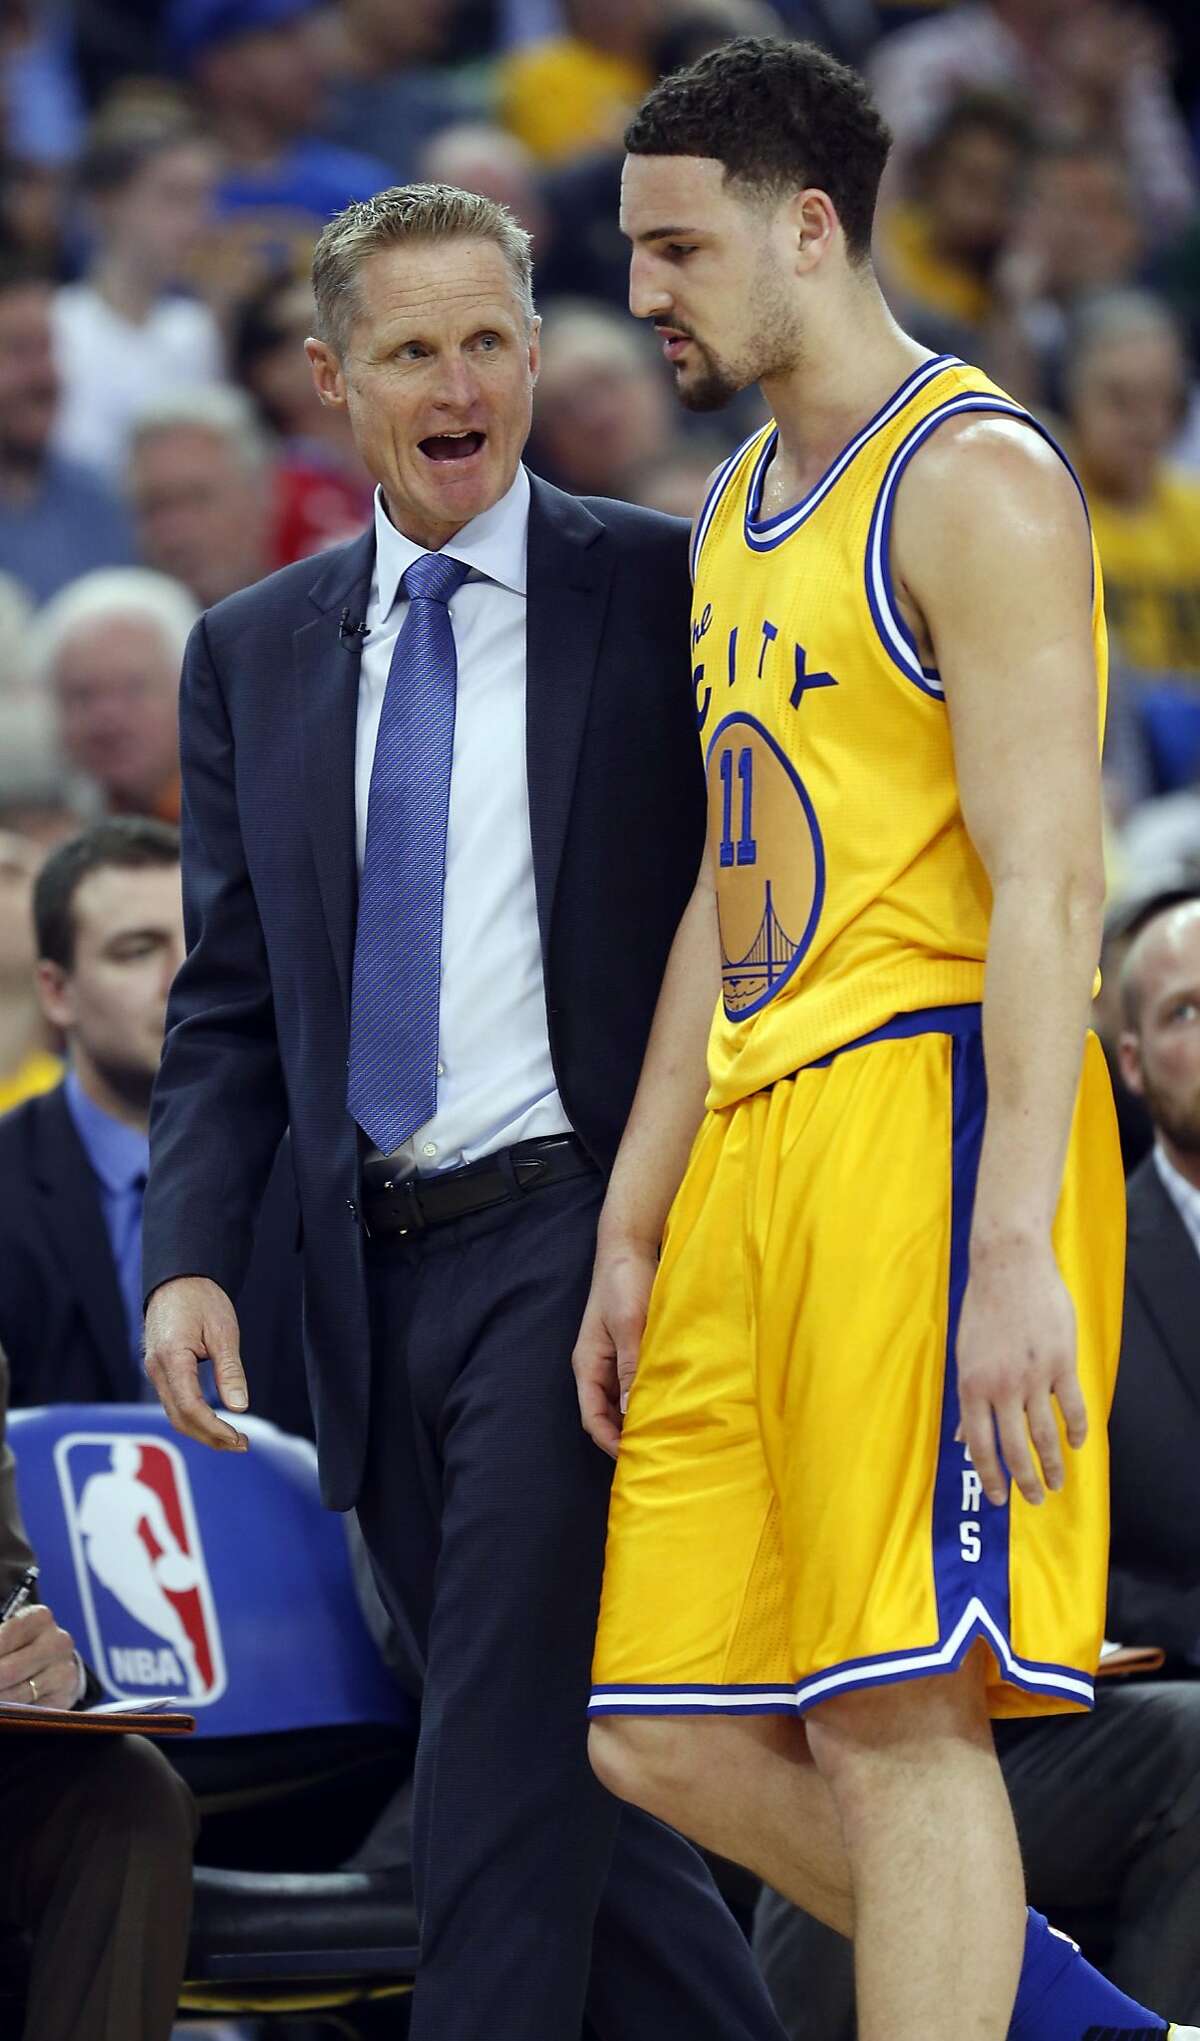 Golden State Warriors' head coach Steve Kerr talks with Klay Thompson in 1st quarter against Washington Wizards during NBA game at Oracle Arena in Oakland, Calif., on Tuesday, March 29, 2016.